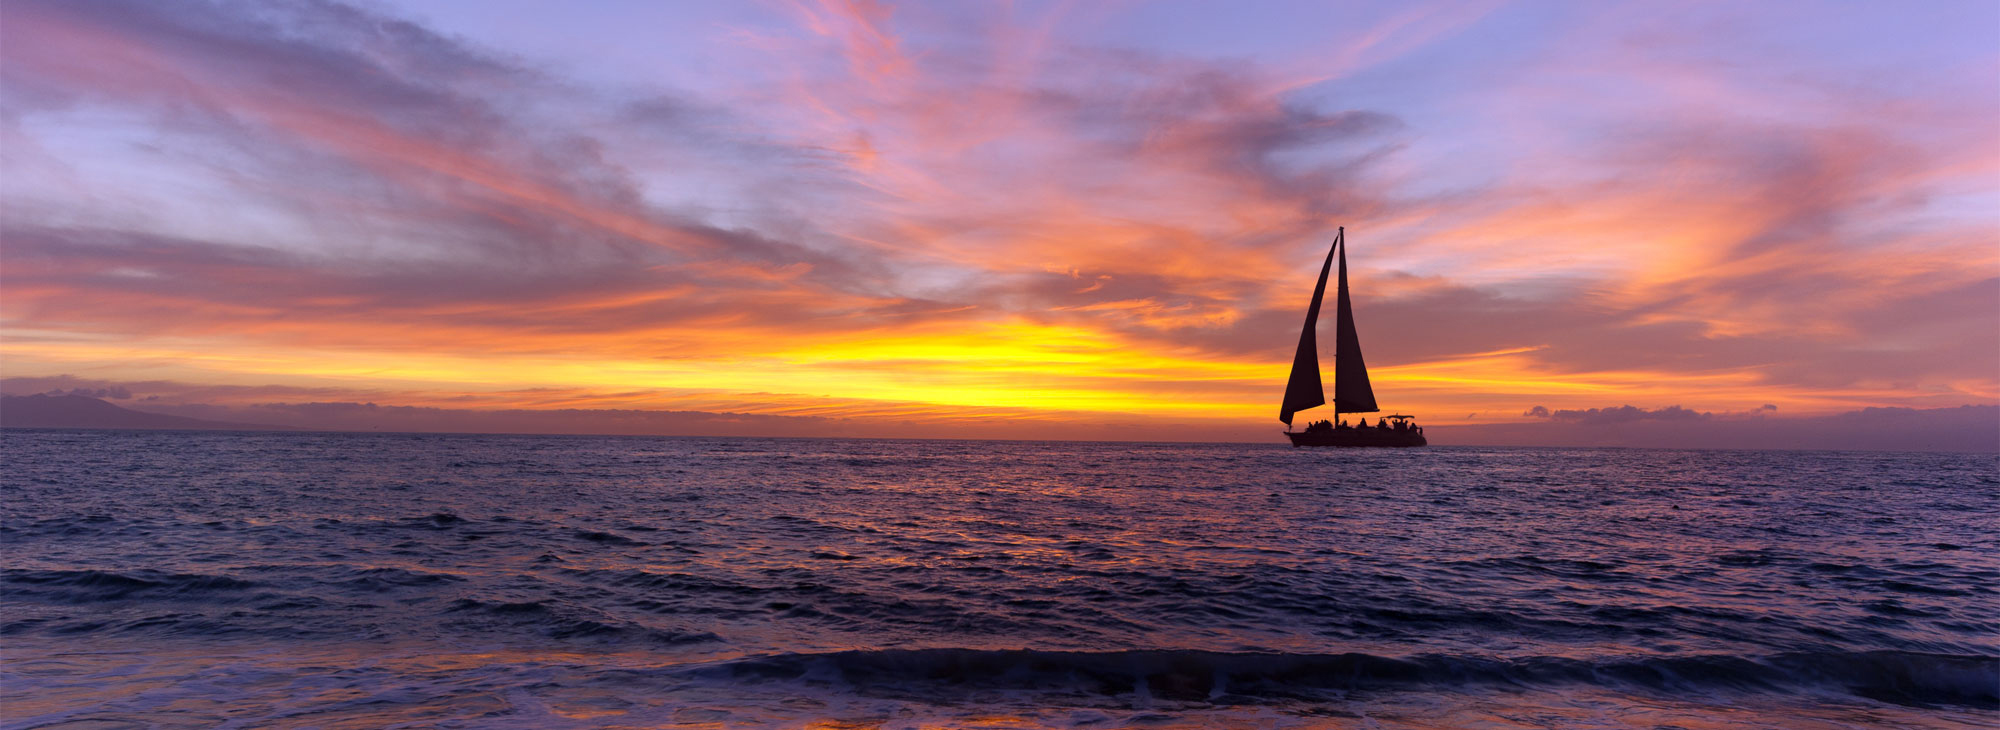 Sailboat sunset silhouette is a colorful vibrant orange and yellow cloudscape sunset.